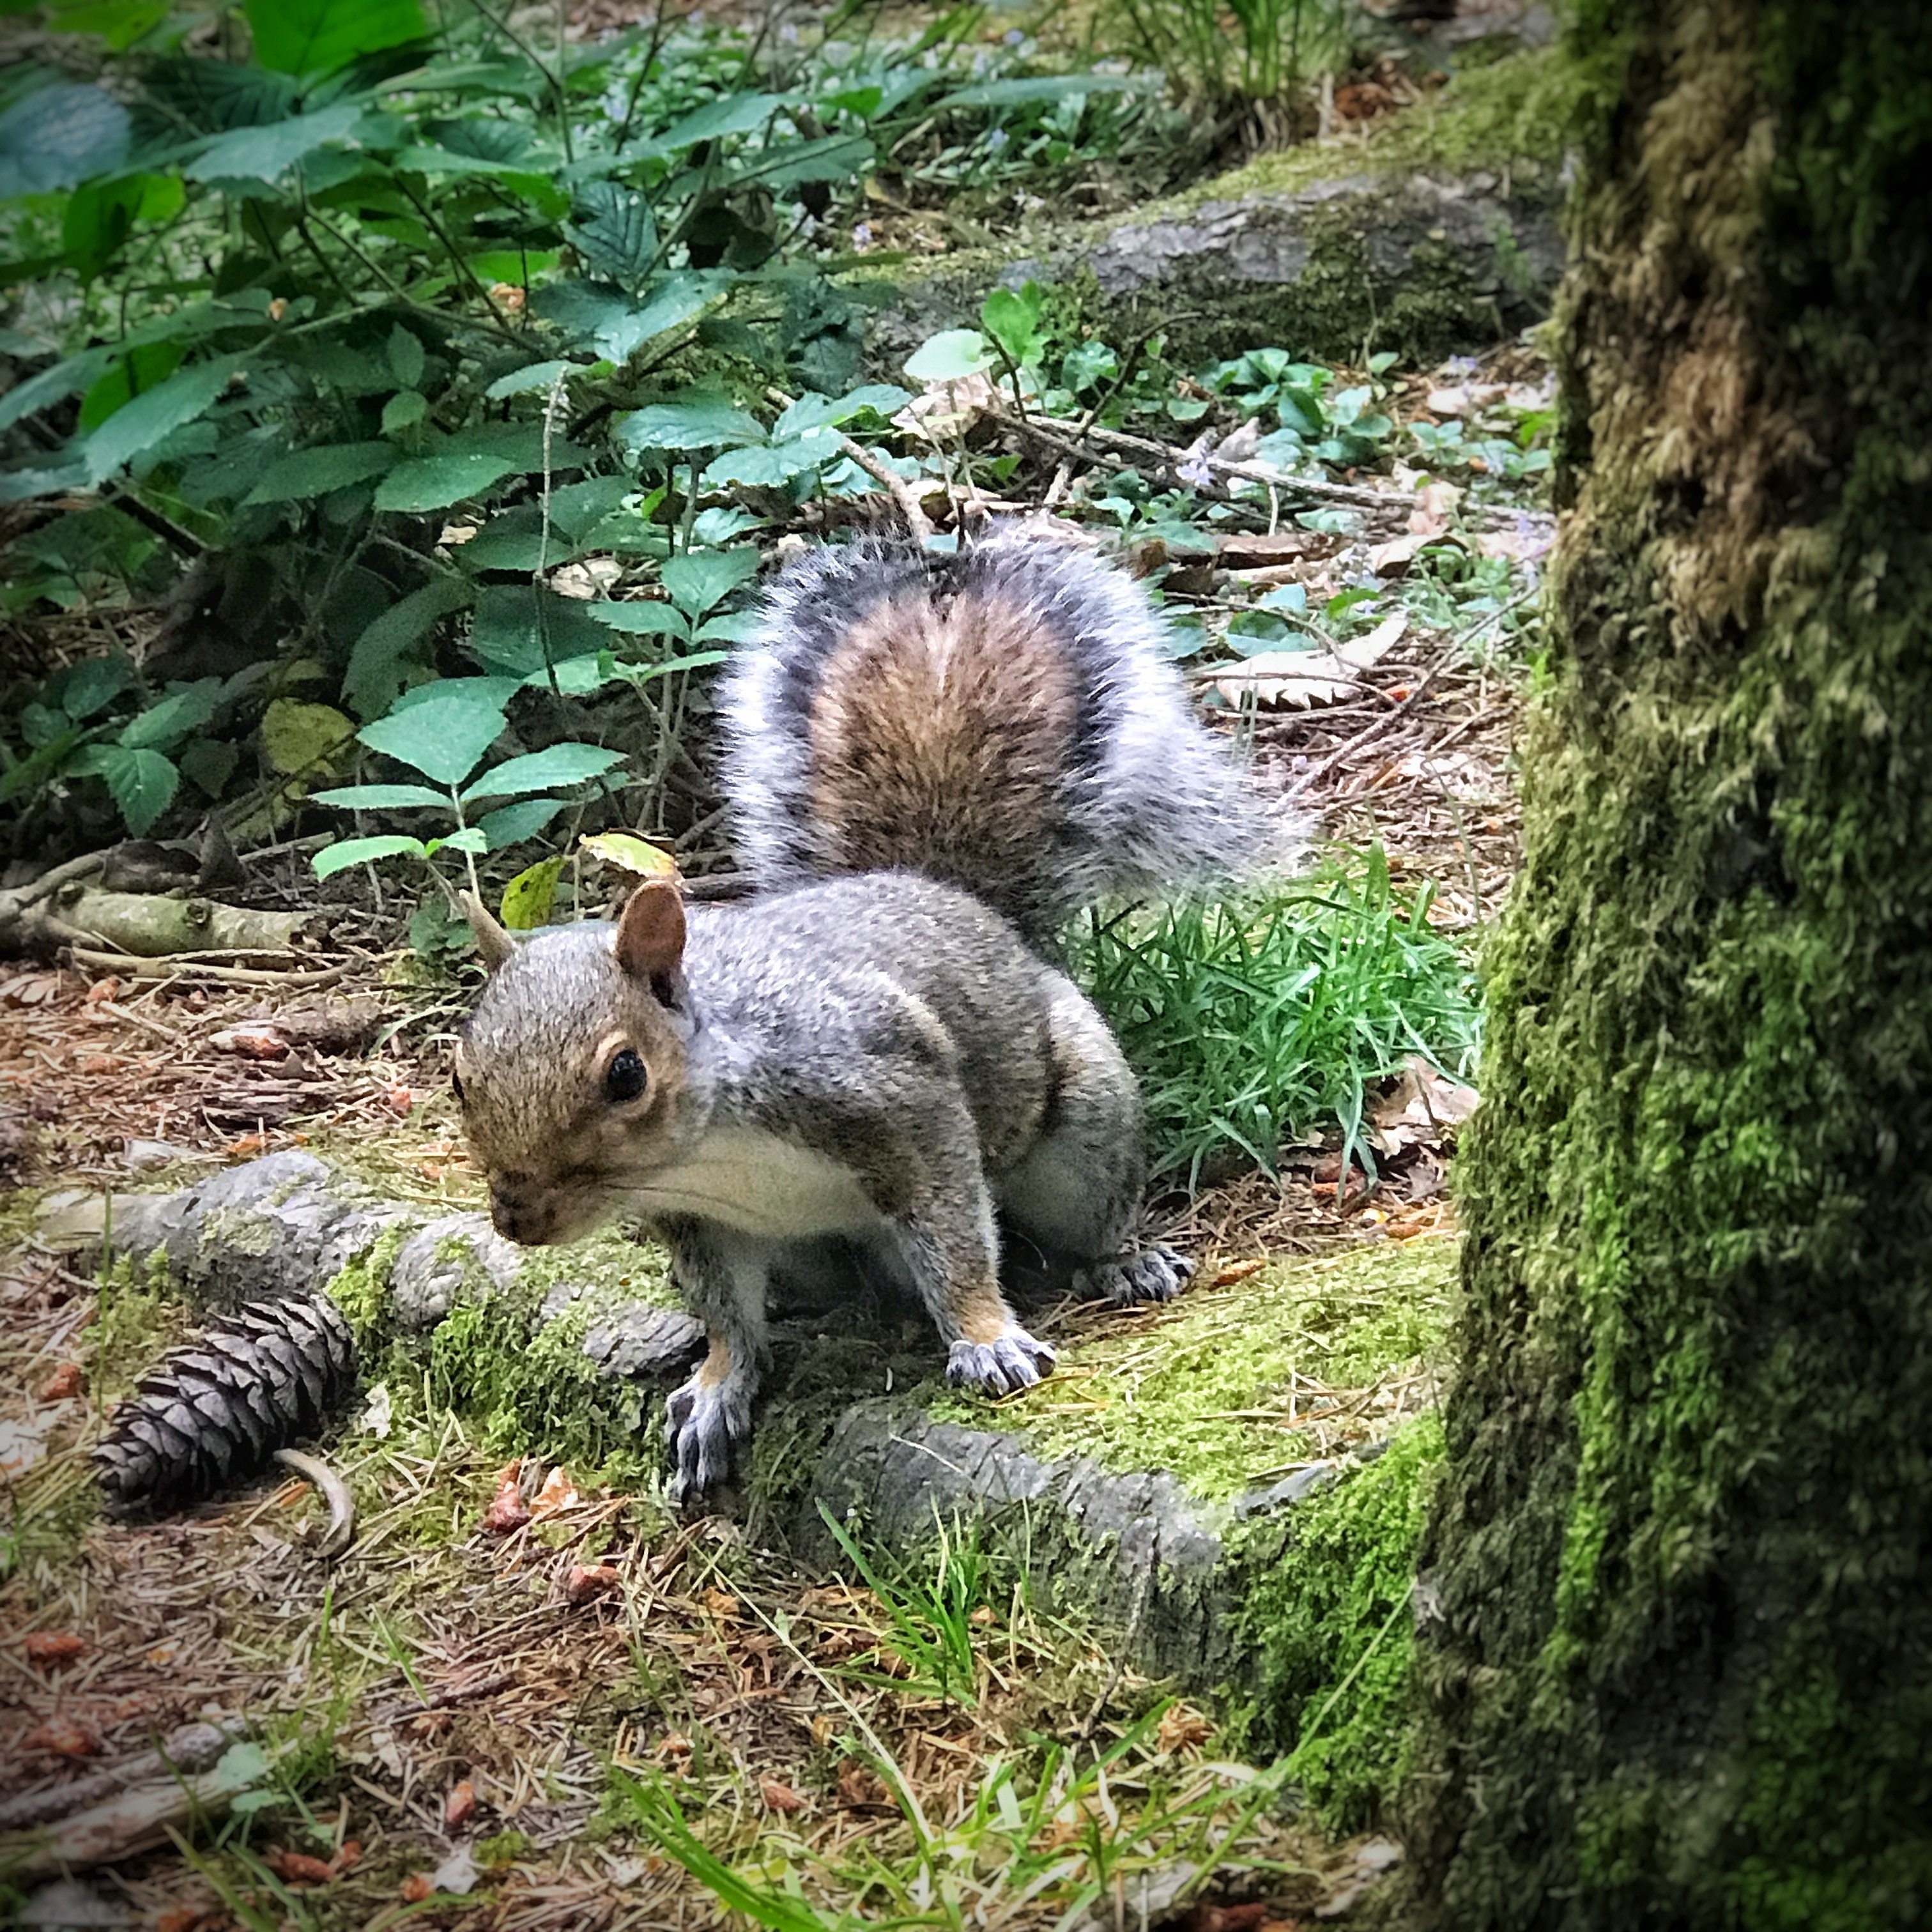 Took time staying still but this little fellow was worth it.